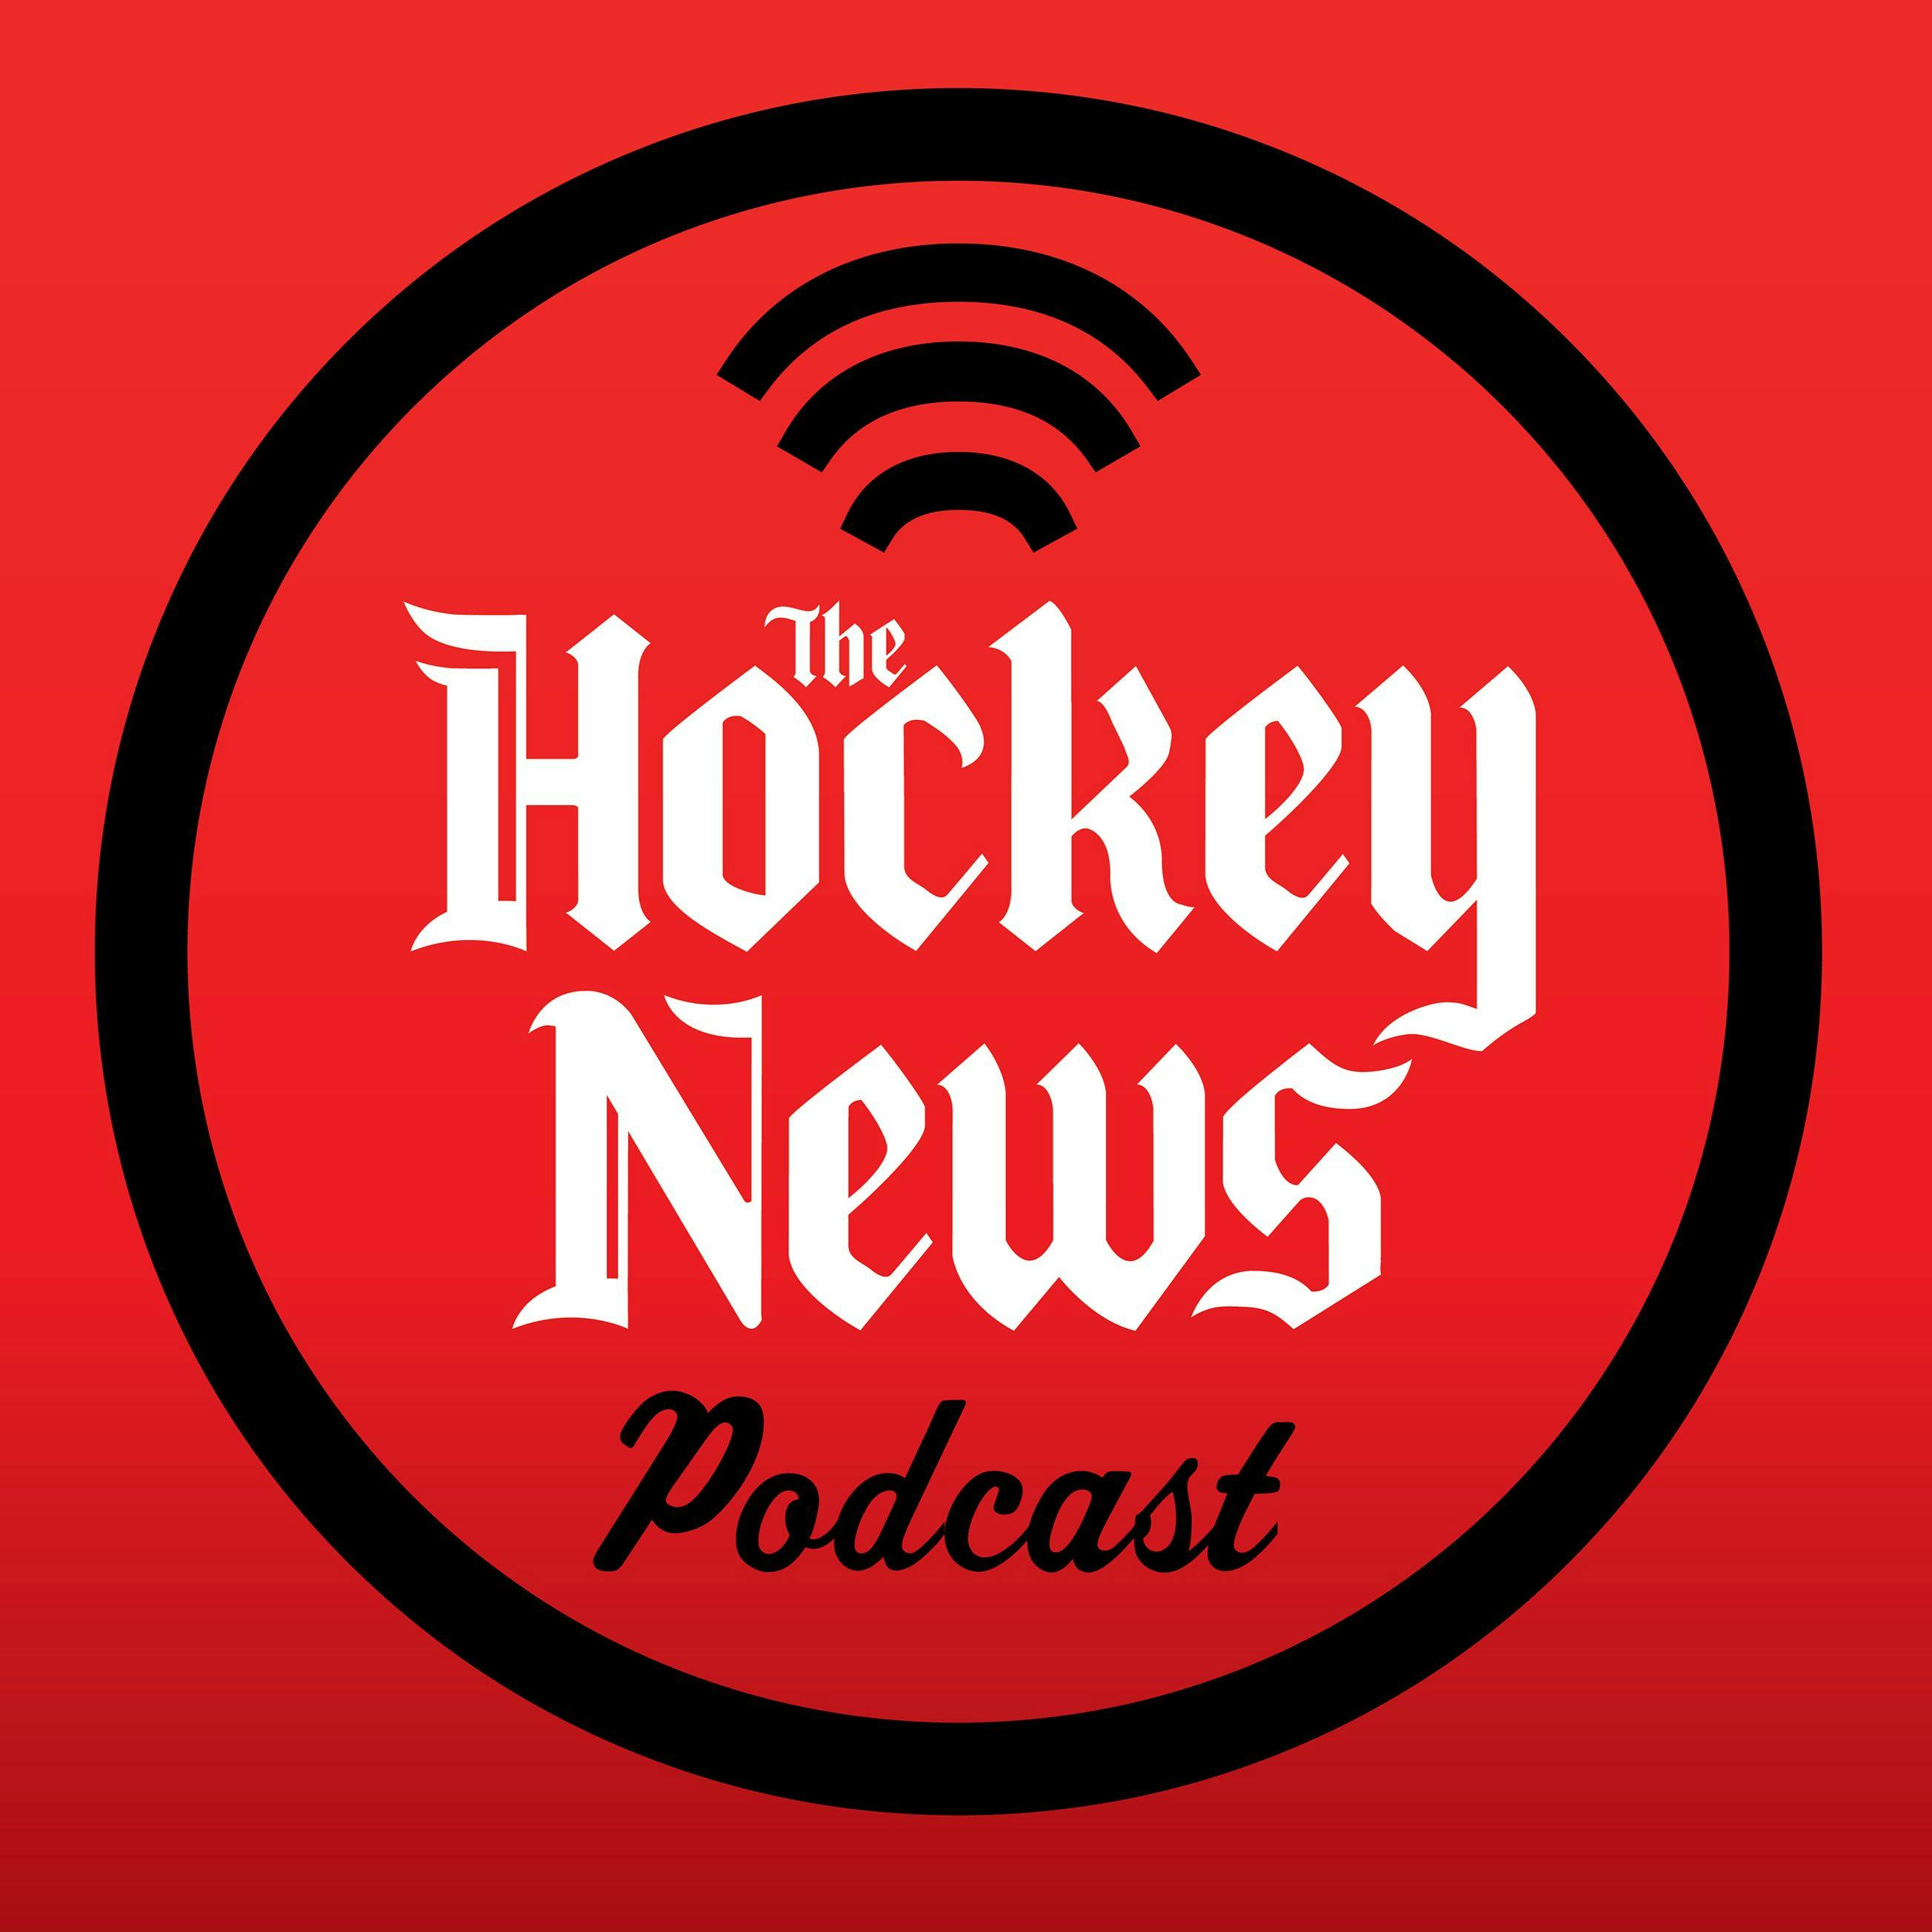 The Hockey News Podcast: Which NHLers Deserve Extra Gifts?